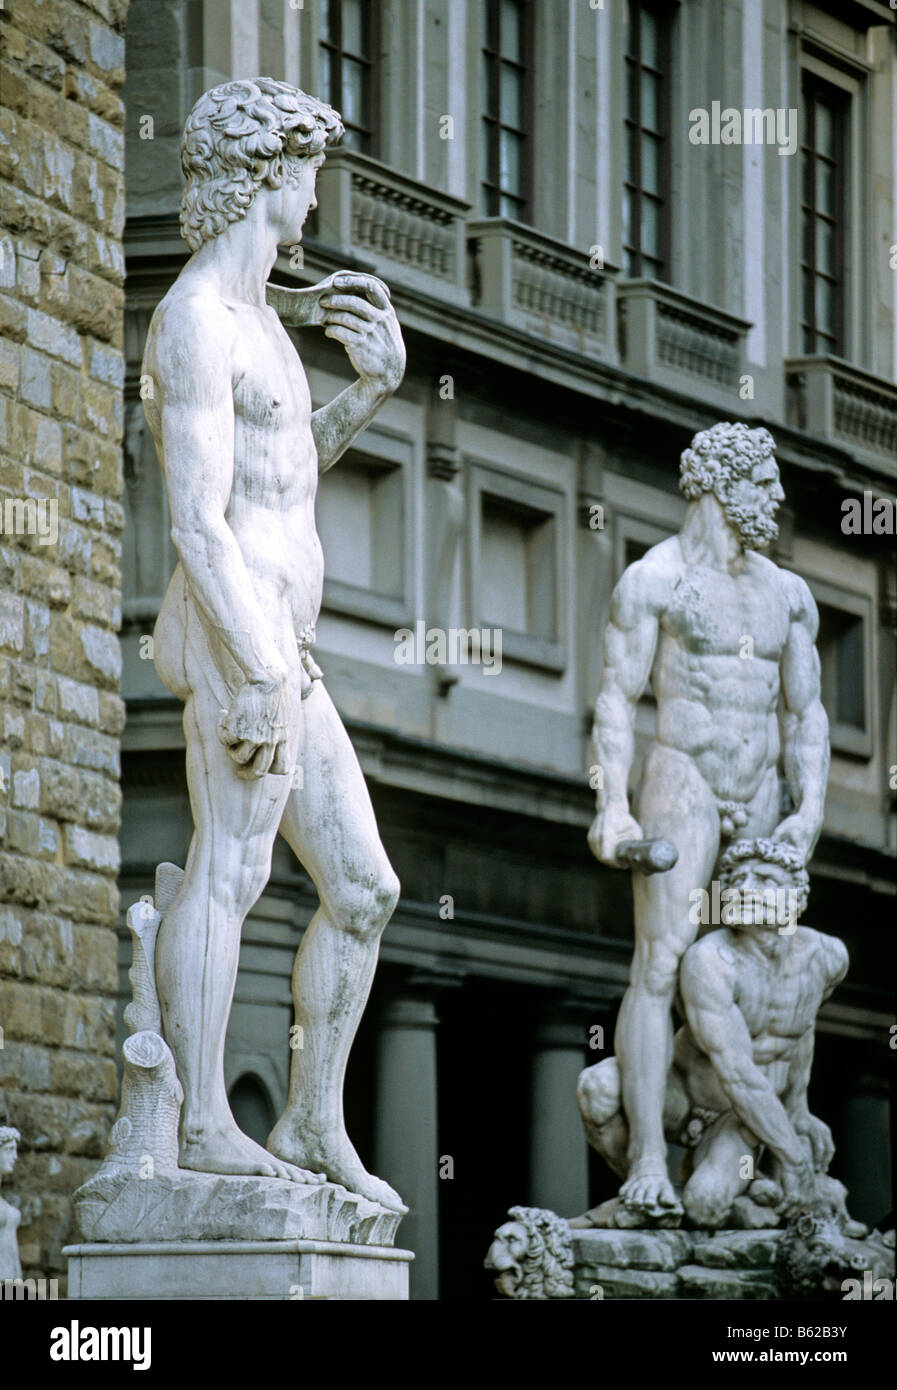 Statue of David by Michelangelo Buonarroti, Statue of Hercules and Cacus, Florence, Firenze, Tuscany, Italy, Europe Stock Photo